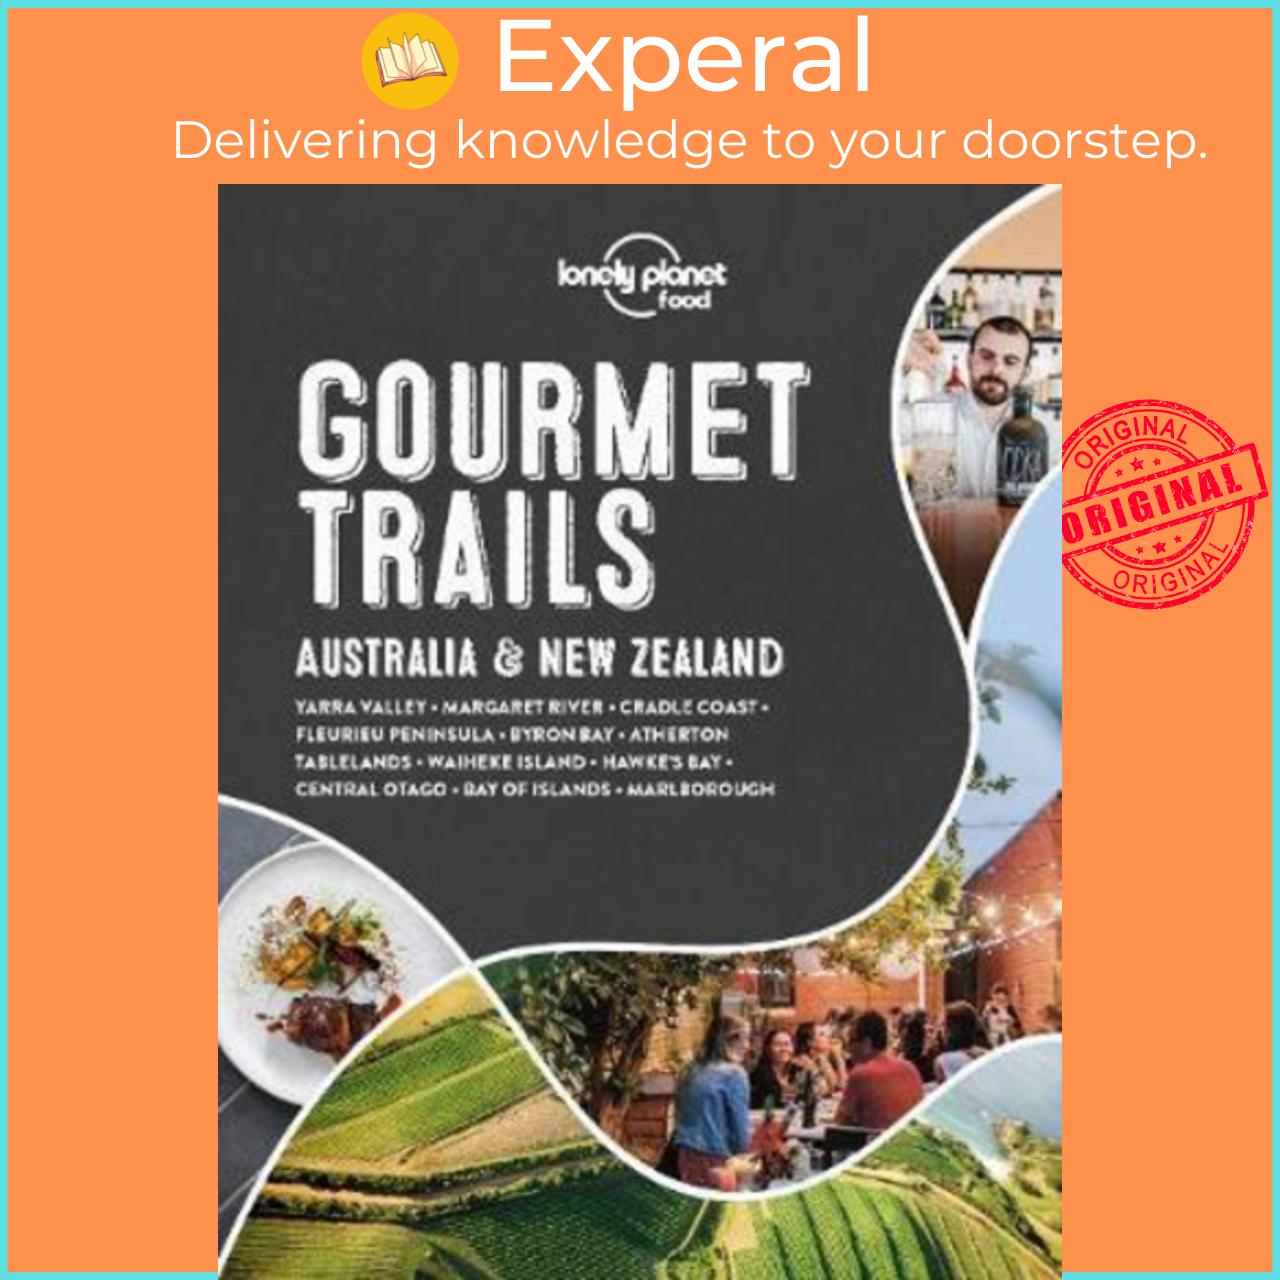 Sách - Lonely Planet Gourmet Trails - Australia & New Zealand by Food (hardcover)